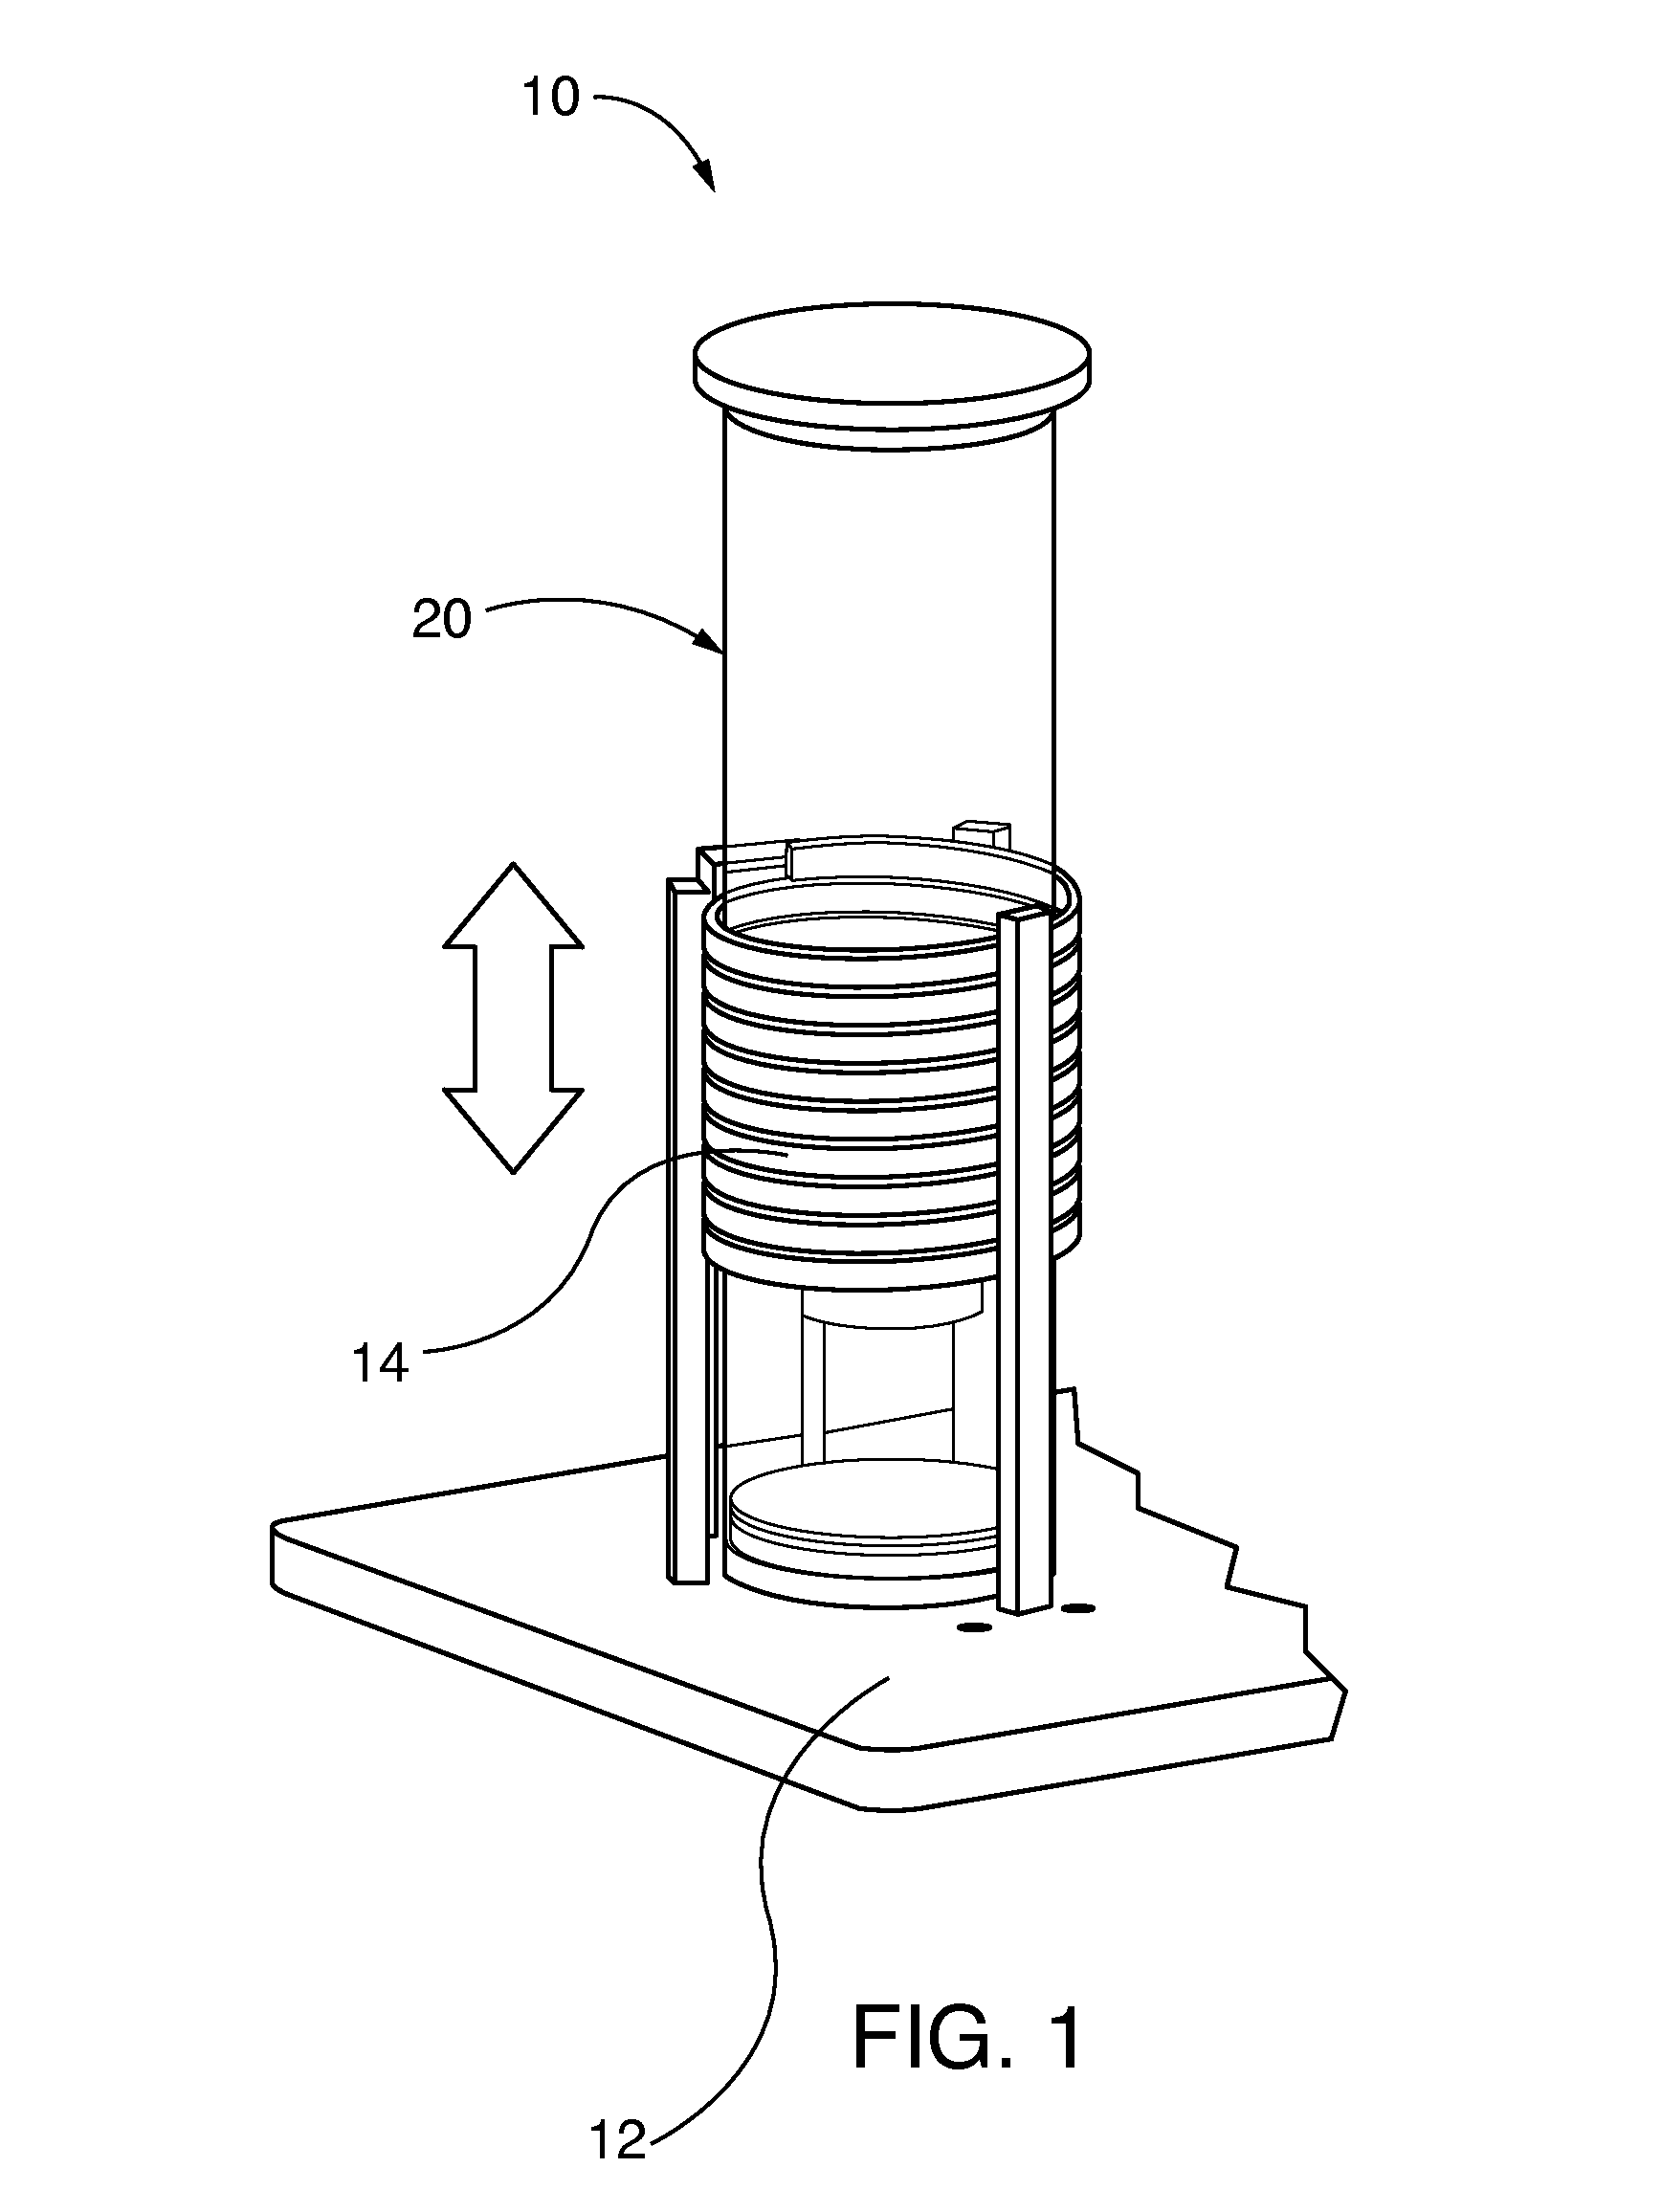 Crystal Growth Chamber With O-Ring Seal For Czochralski Growth Station